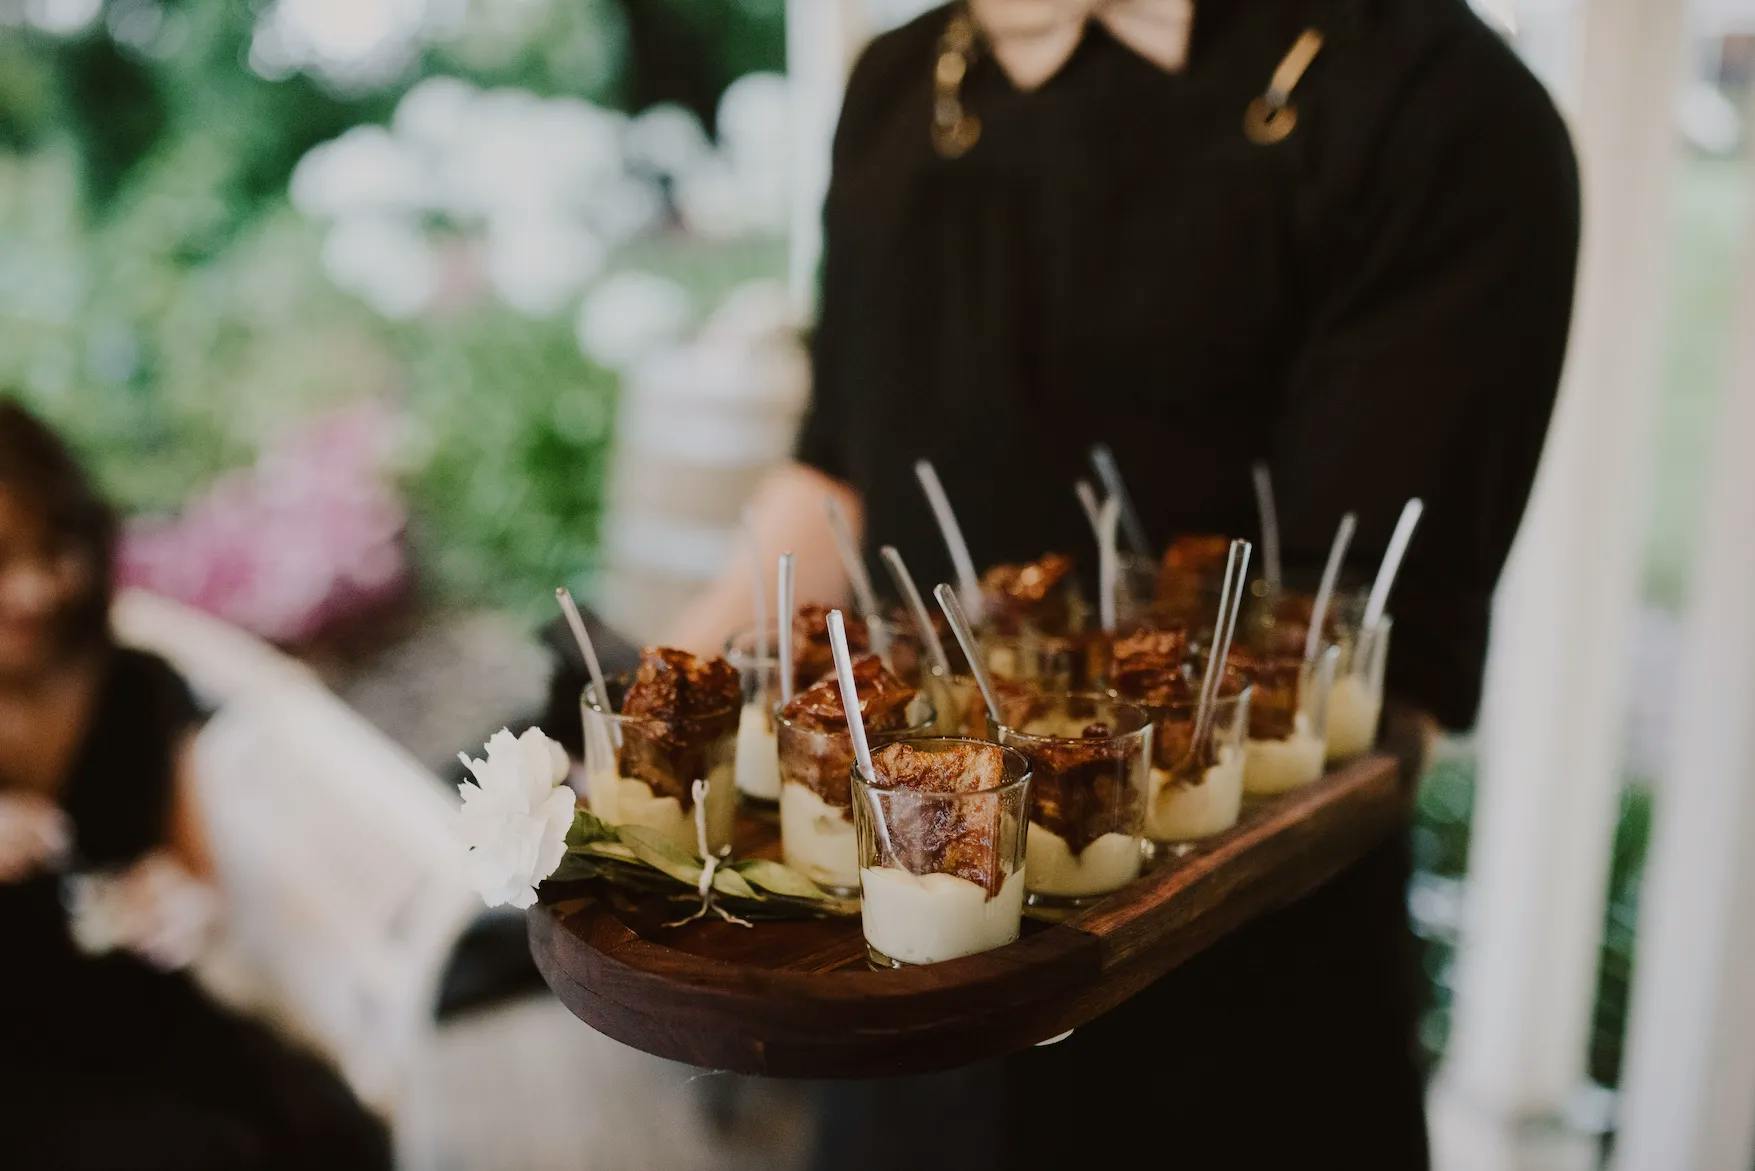 A person in a black outfit holds a wooden tray with several small dessert cups. Each cup contains a creamy dessert topped with a caramelized crust and a small spoon. In the background, there's an outdoor setting with greenery and blurred figures.